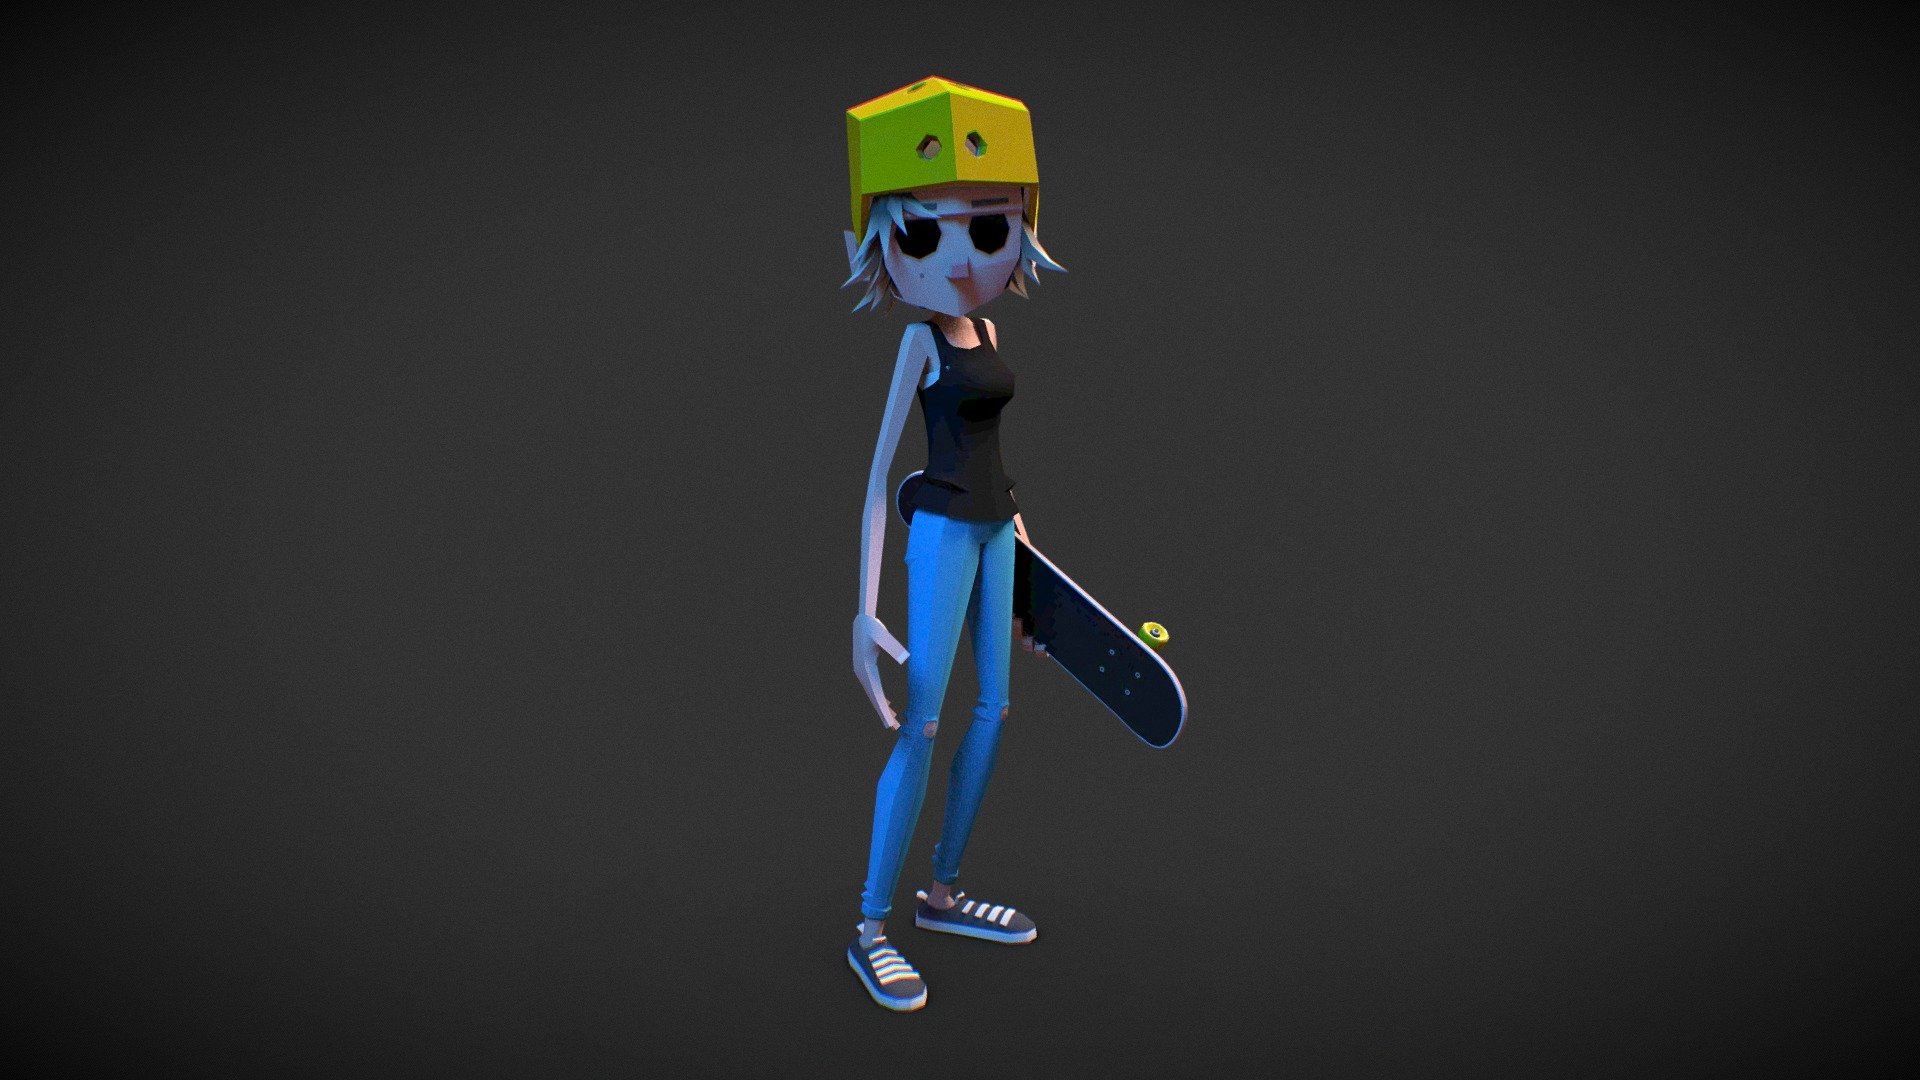 This is one of the characters in development for Pocket Skate

Thanks, for checking it out!
- Pete - Flip - Pocket Skate - 3D model by Pocket Skate! (@PocketSkate) 3d model